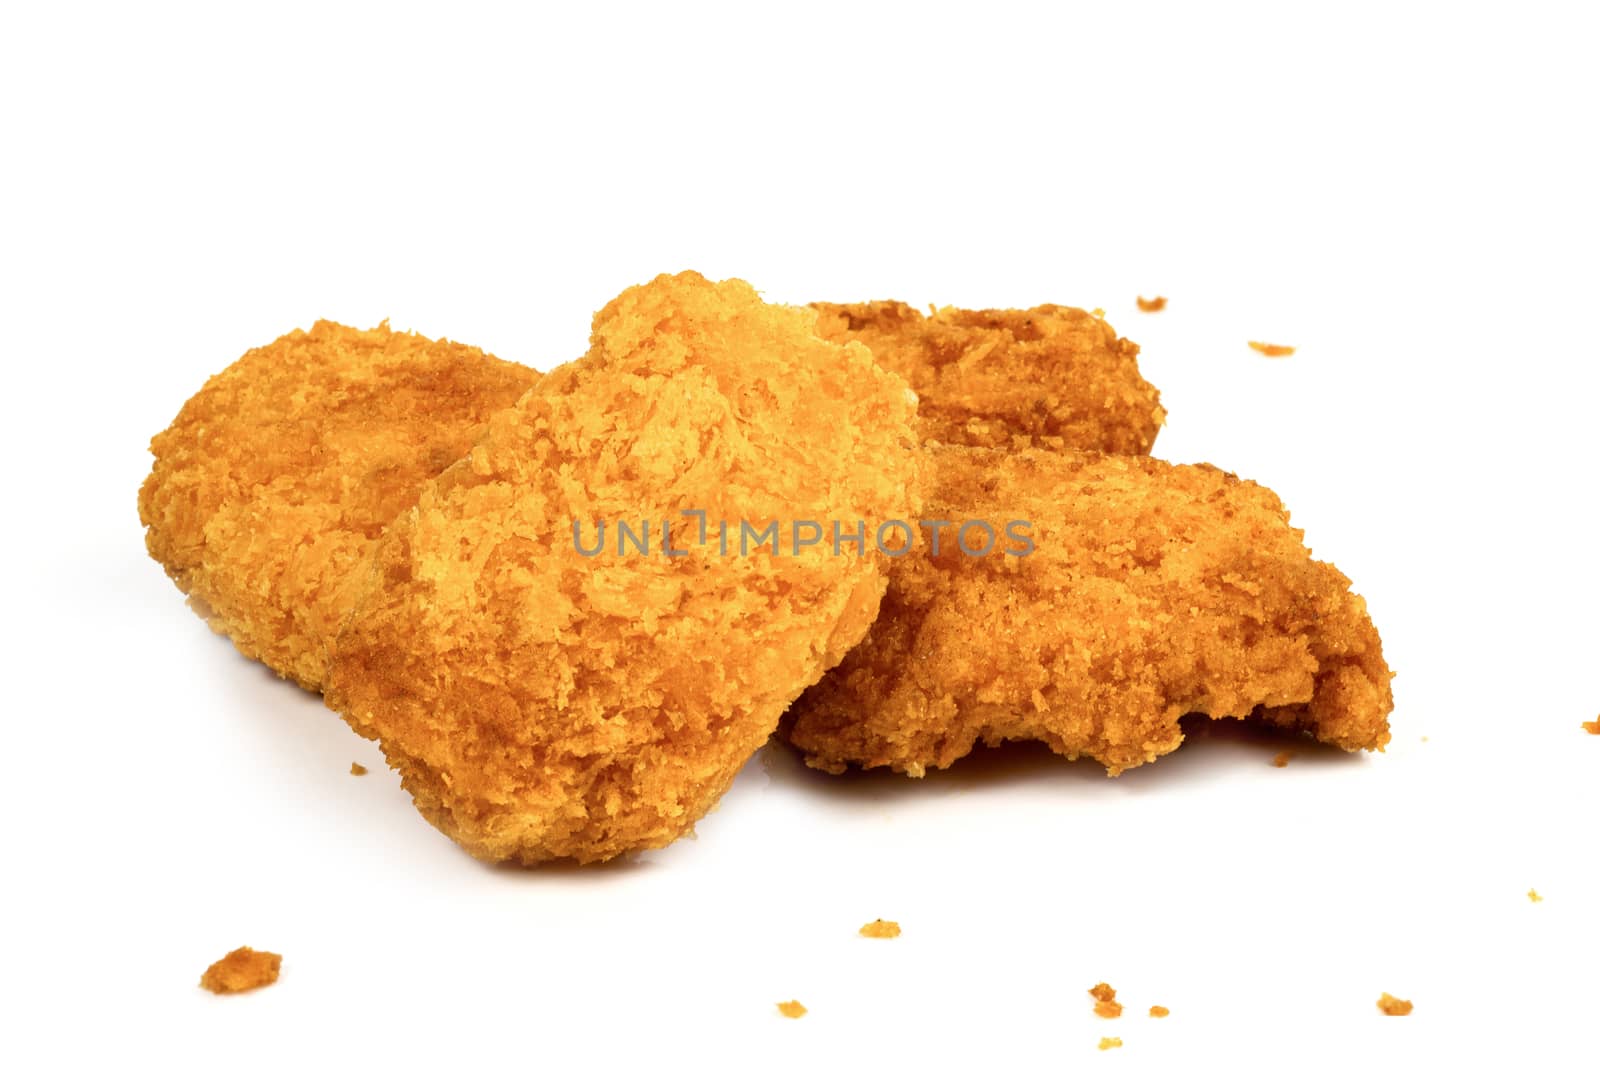 Fried Chicken Nuggets on a white background by sompongtom